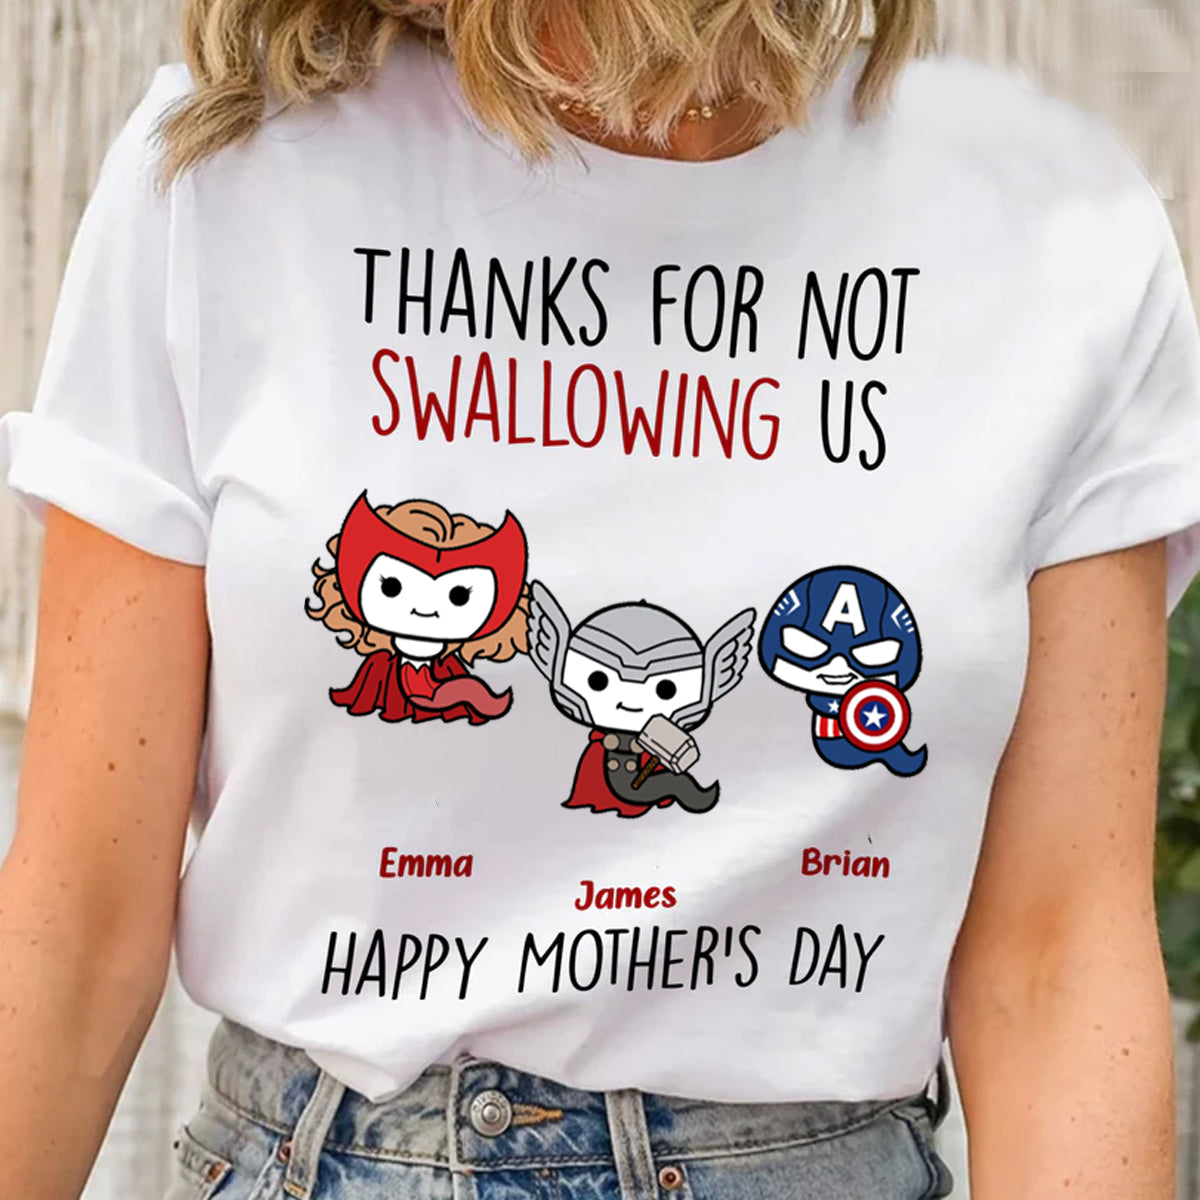 Thank Super Mom For Not Swallowing Us – Gift For Mom, Grandmother – Personalized Shirt